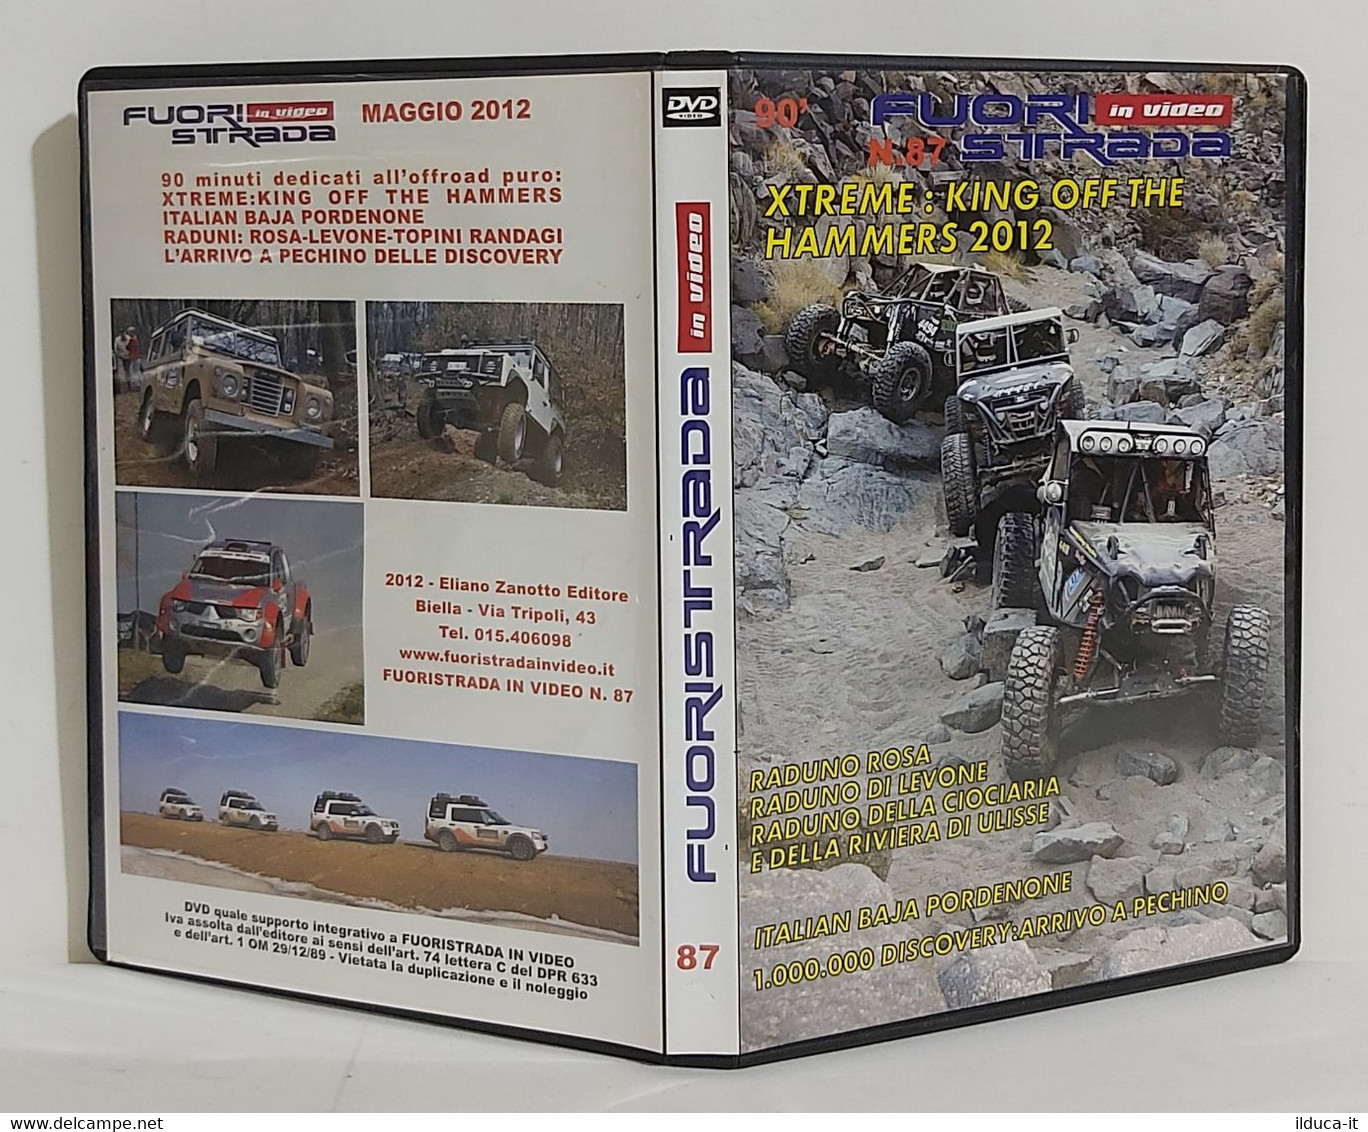 I101815 DVD - Fuoristrada In Video N. 87 - Xtreme: King Off The Hammers 2012 - Sports